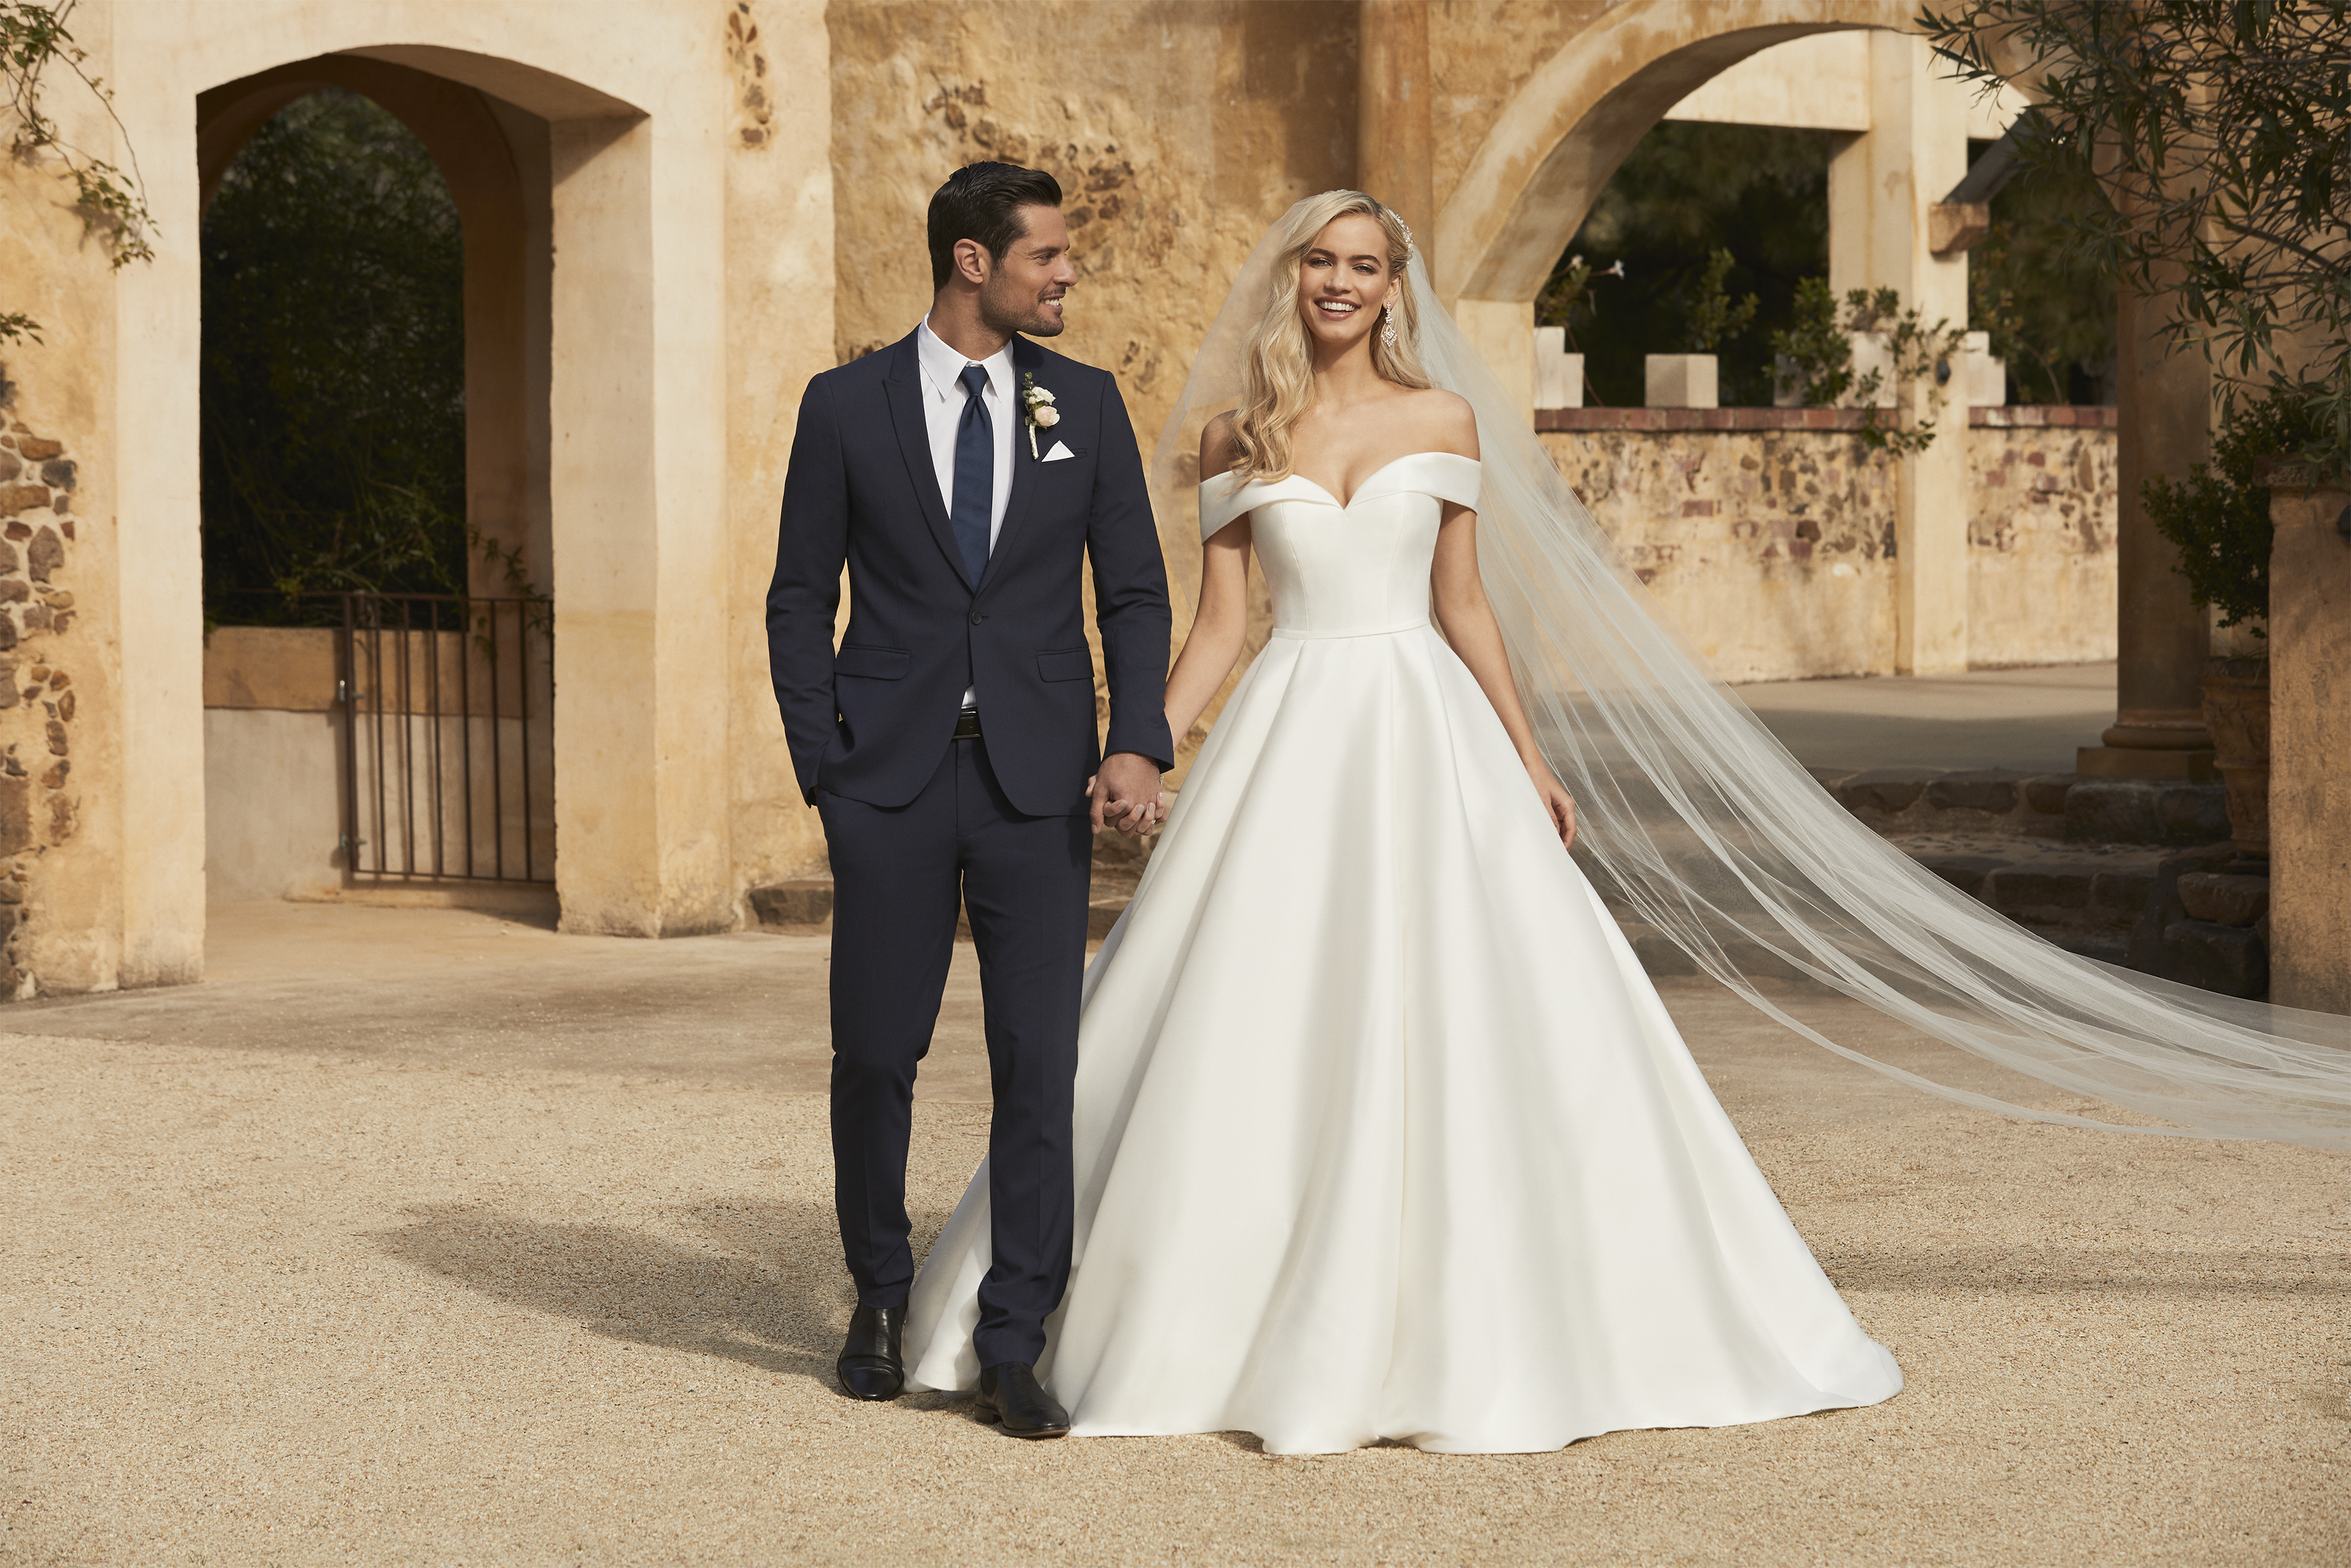 Meet the Regal Ballgown of Your Dreams: Kennedy, Style Y12014